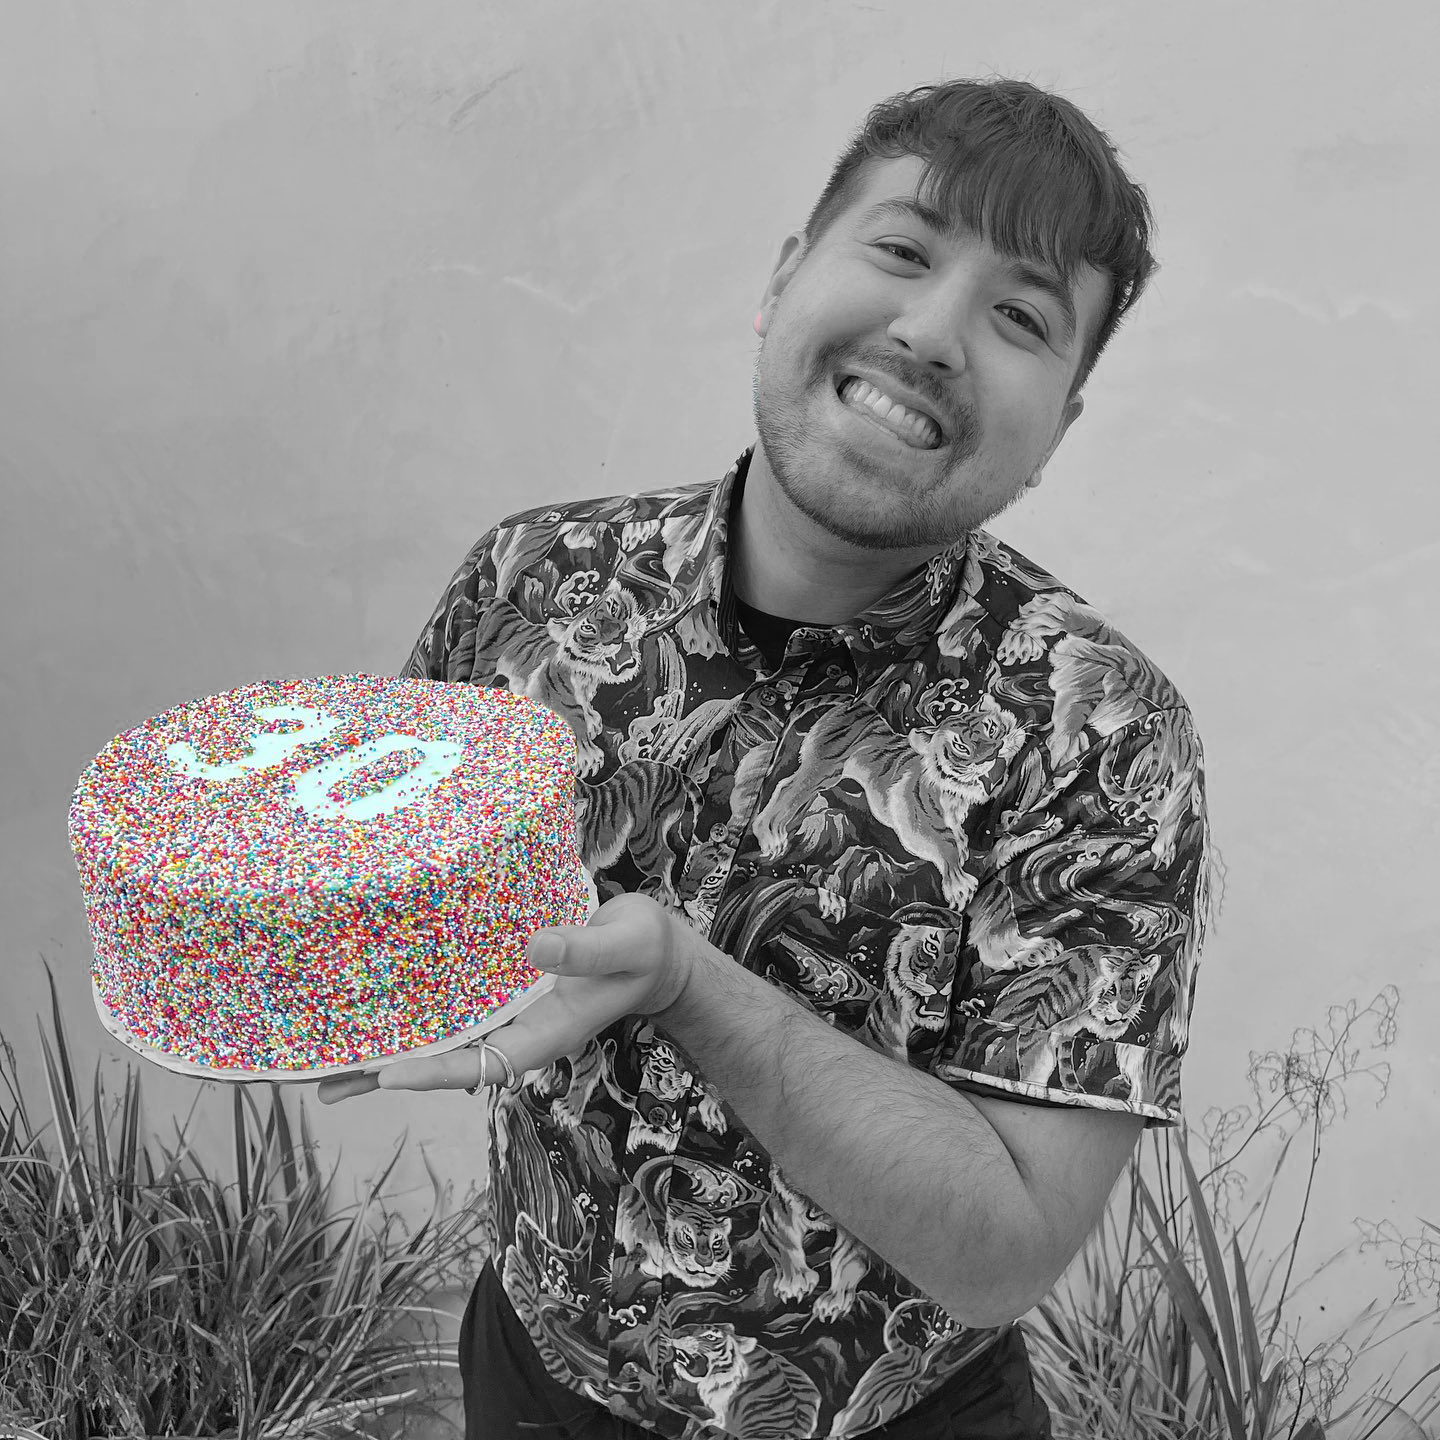 Person holding Sprinkle Deco Cake